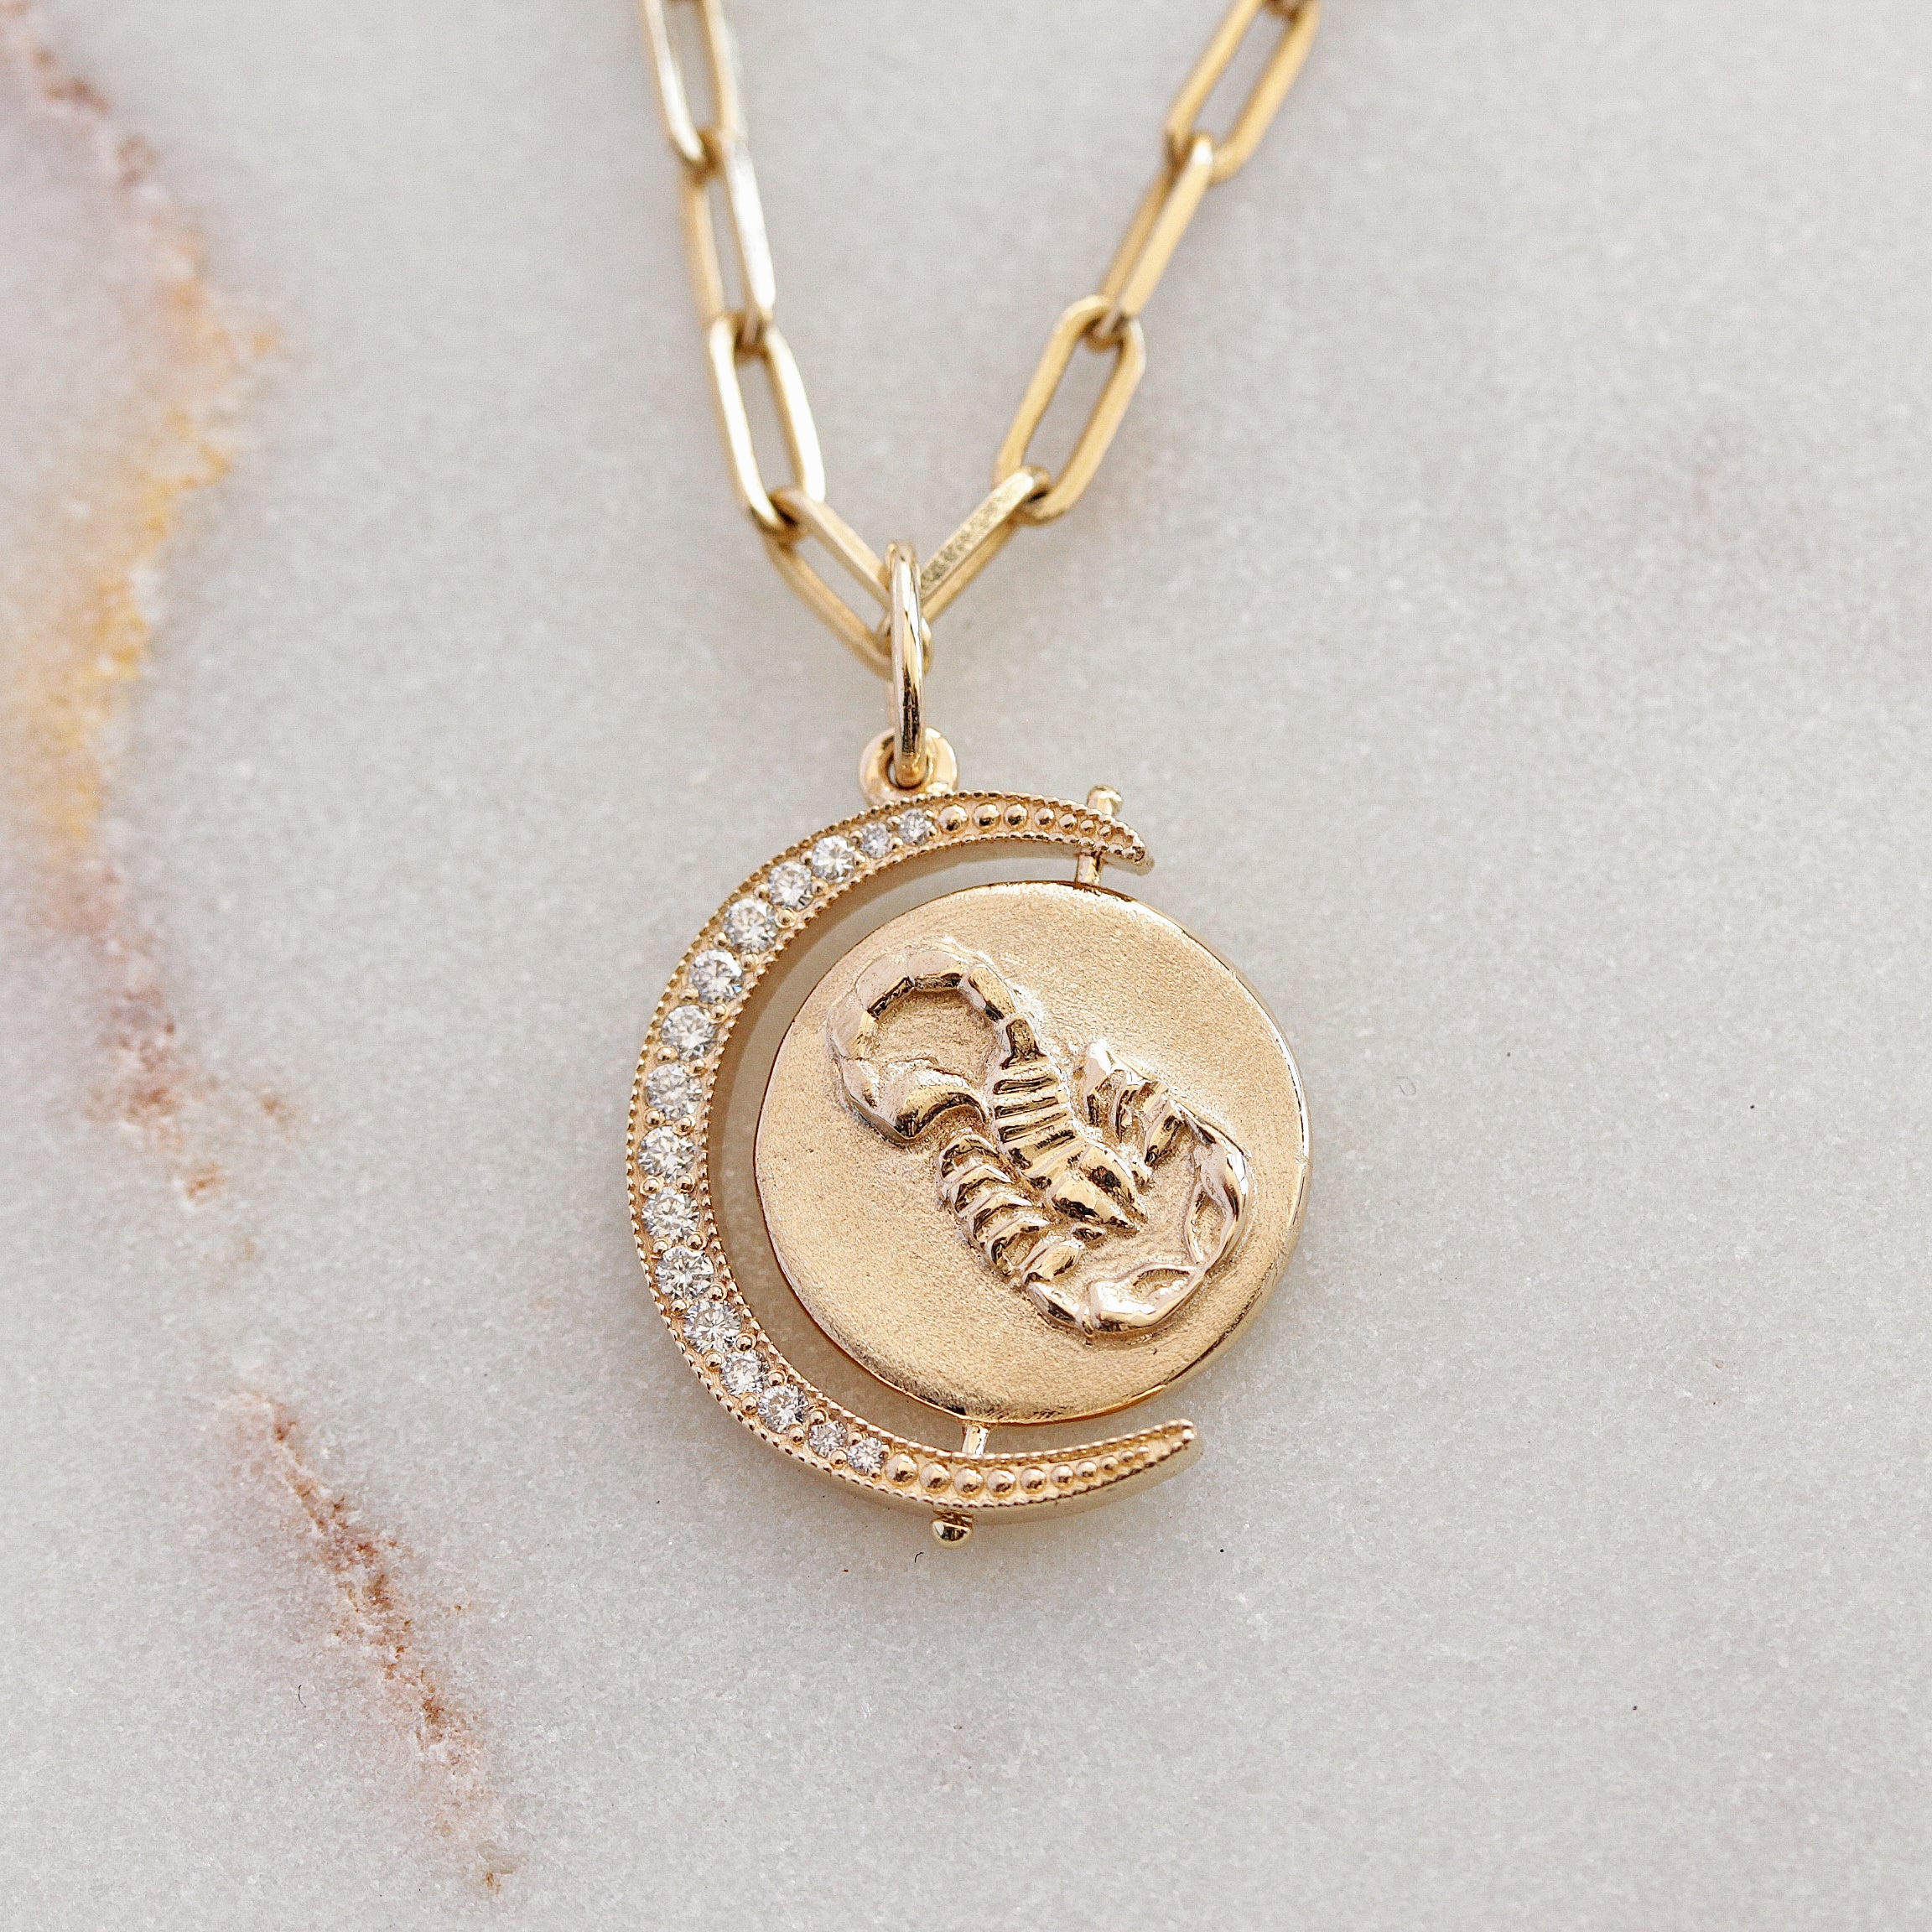 Astrology Signs Spinning Diamond Crescent Coin Pendant Written In The Stars